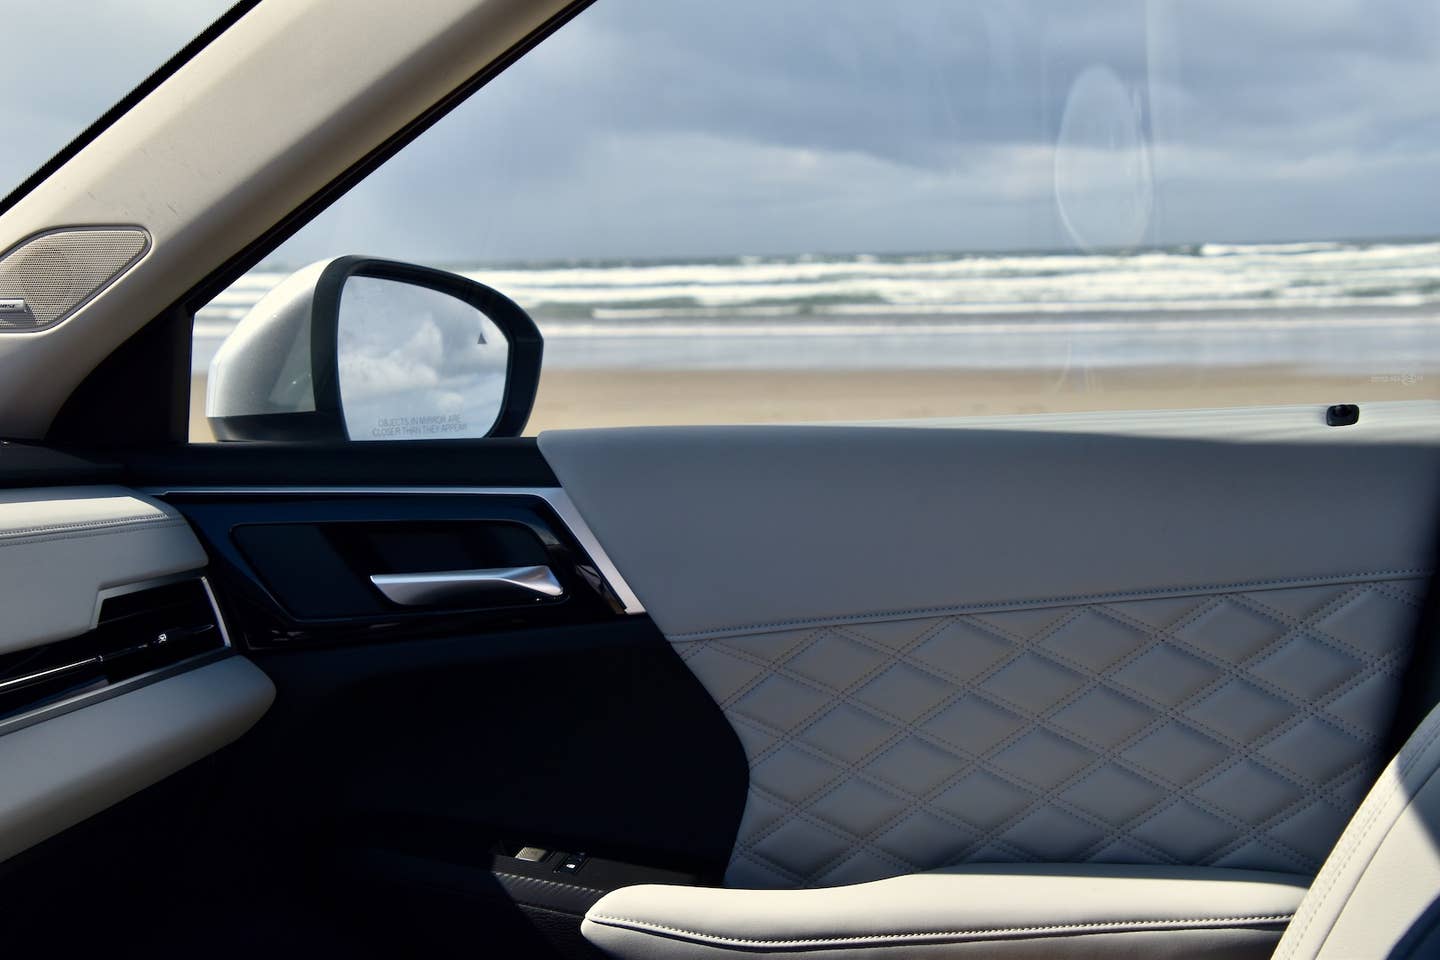 2023 Mitsubishi Outlander SEL S-AWC interior view of the Pacific Ocean